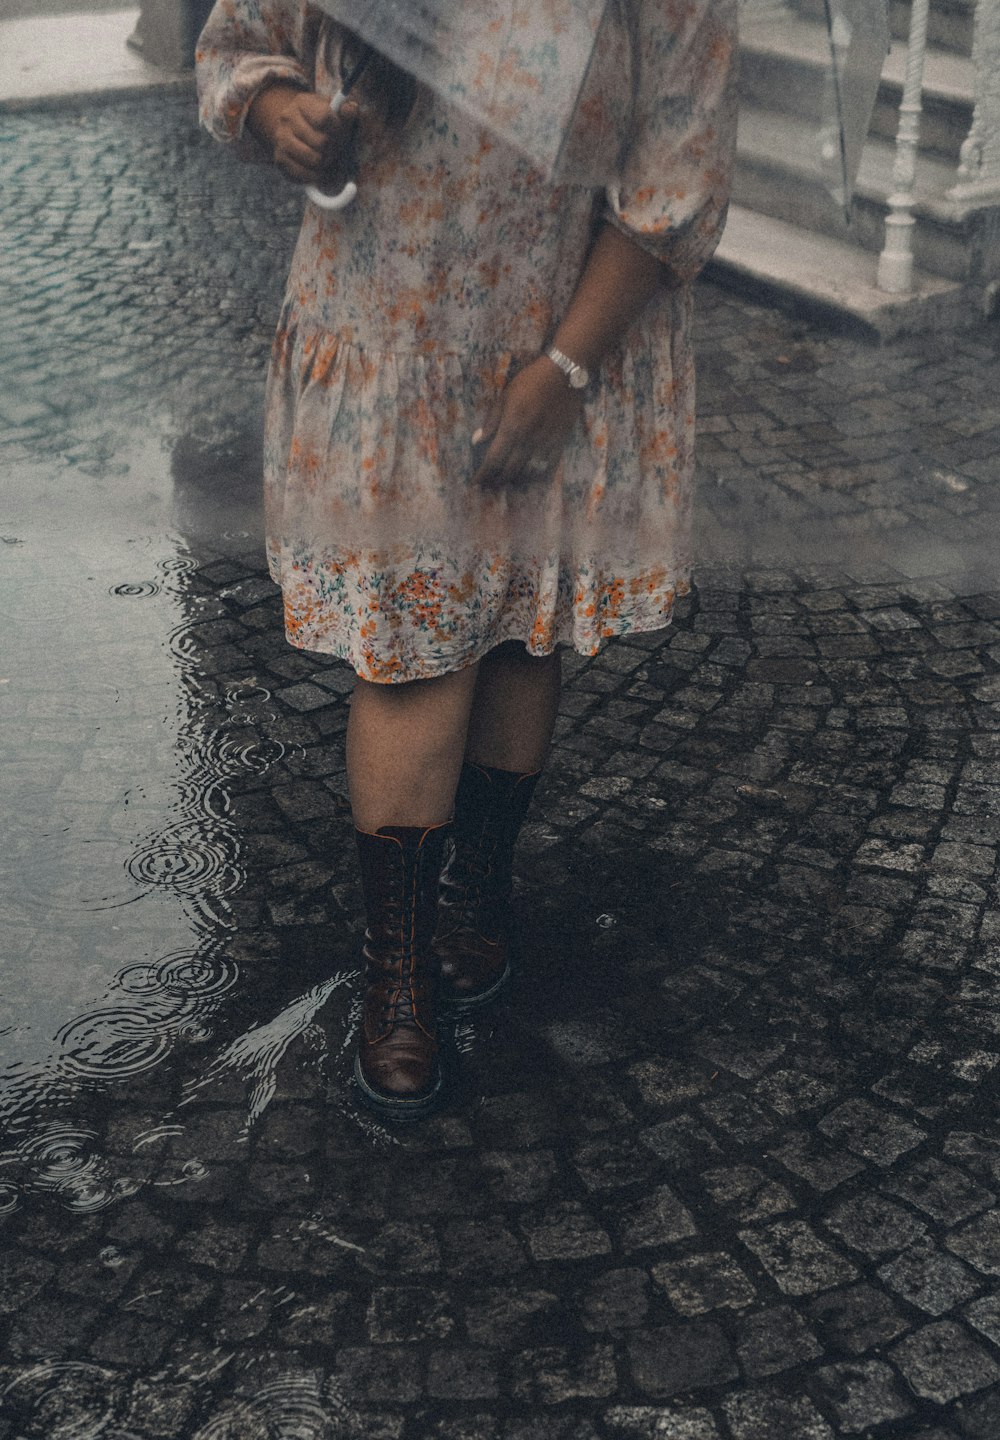 a person wearing a skirt and boots